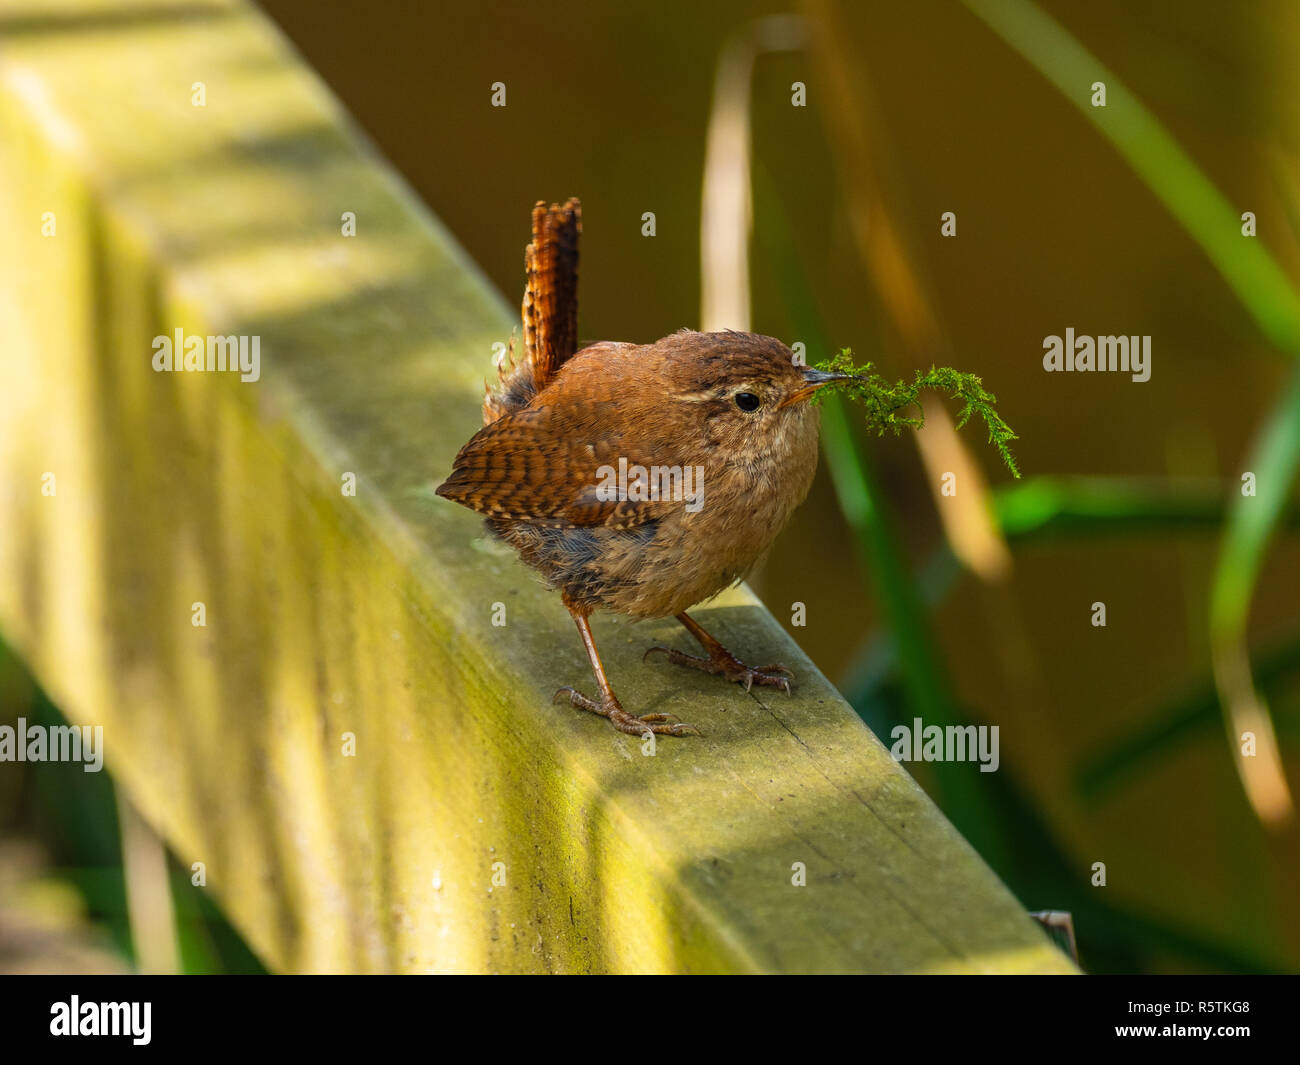 Wren on a Post With Grass in its Beak Stock Photo